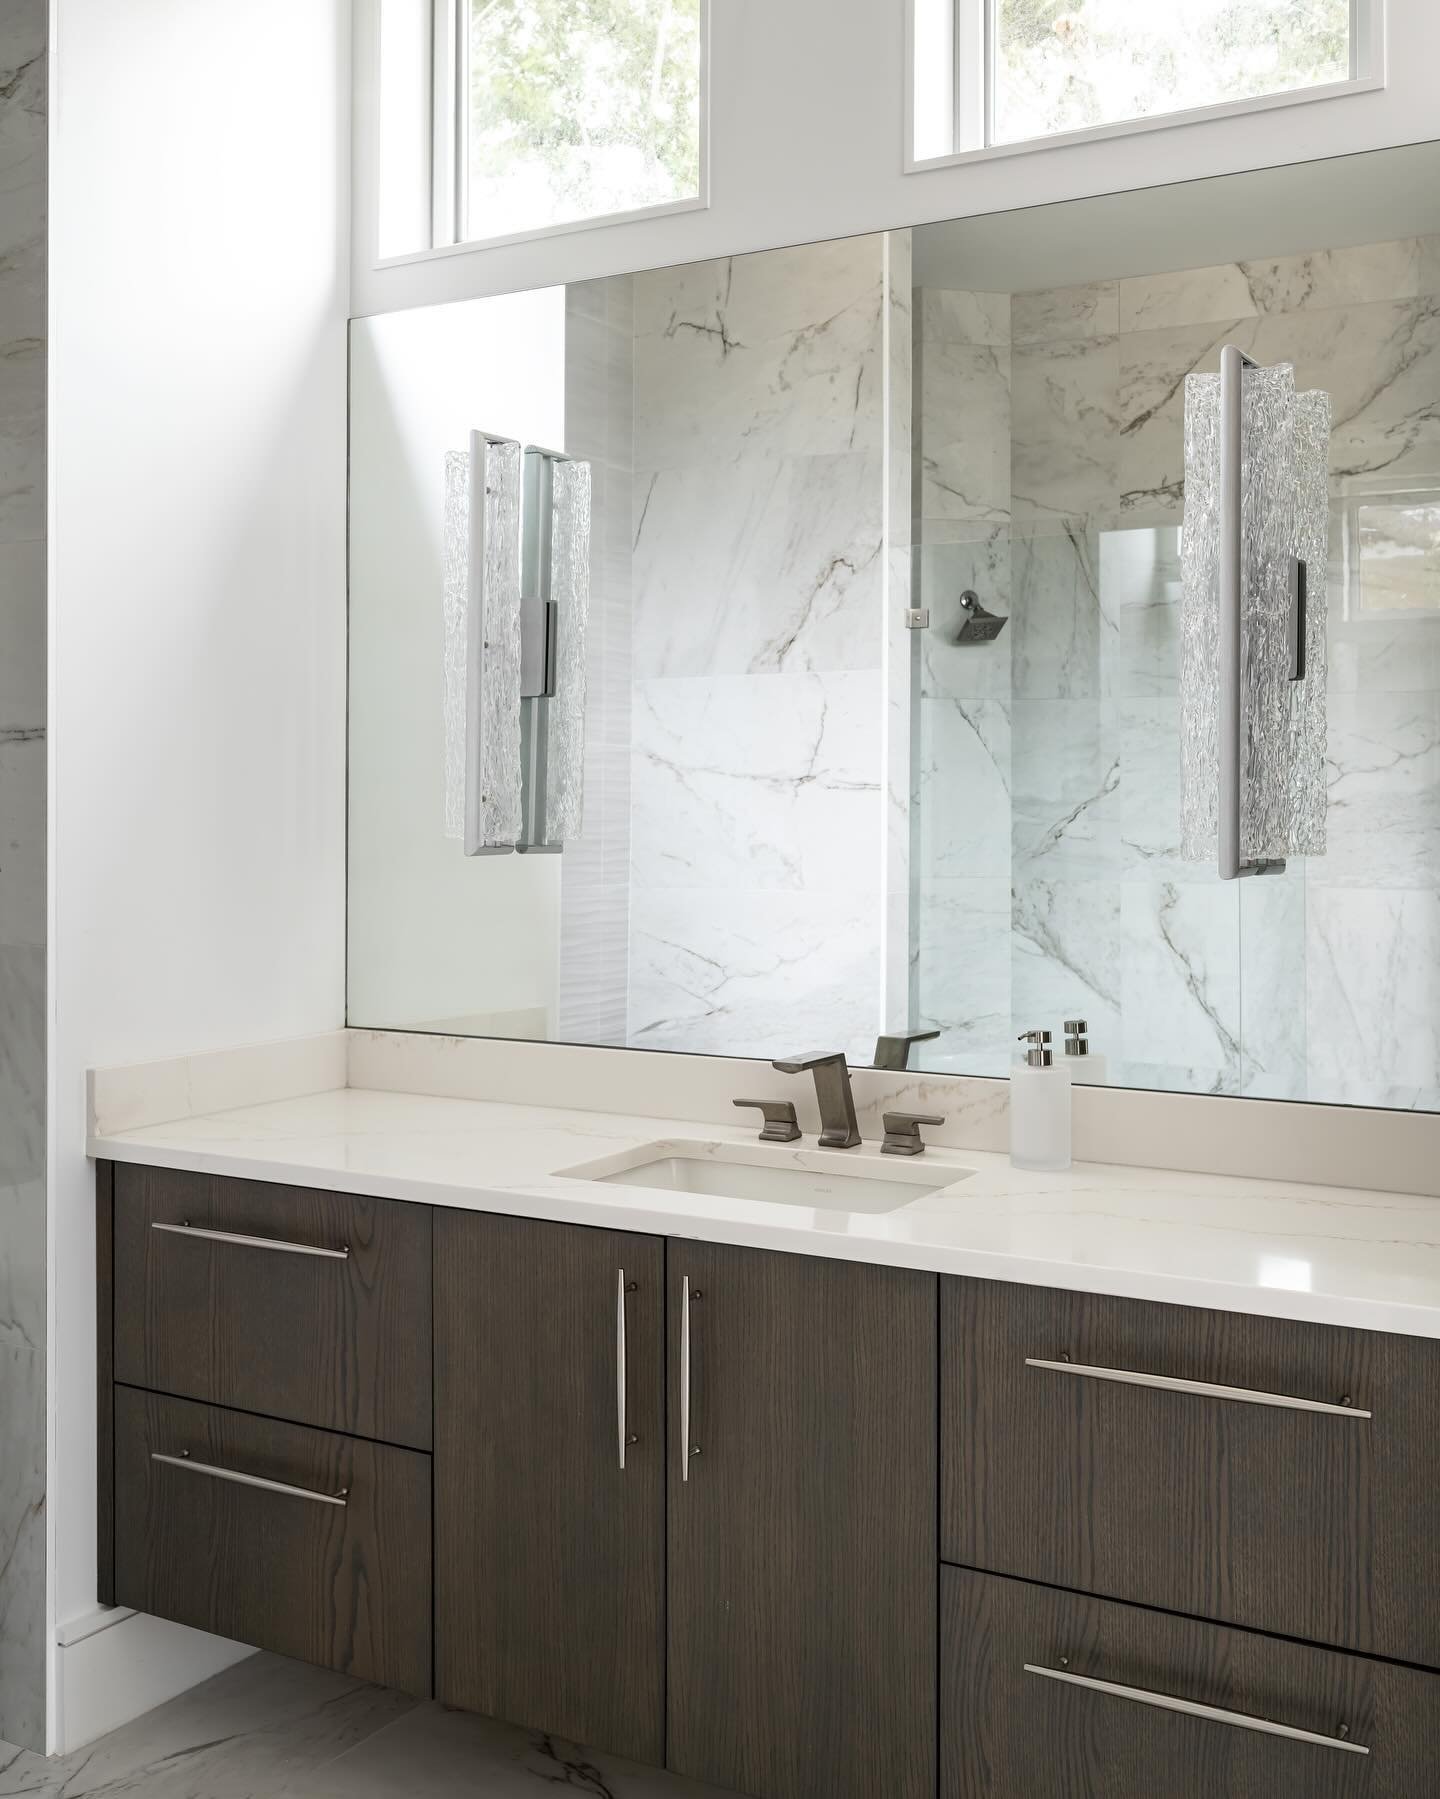 The Primary Bathroom boasts an exquisite and sophisticated design that exudes cleanliness and brightness. The addition of sconce lighting brings a touch of elegance and refinement, contributing to the overall ambience.

Project: By The Bay
Designer: 